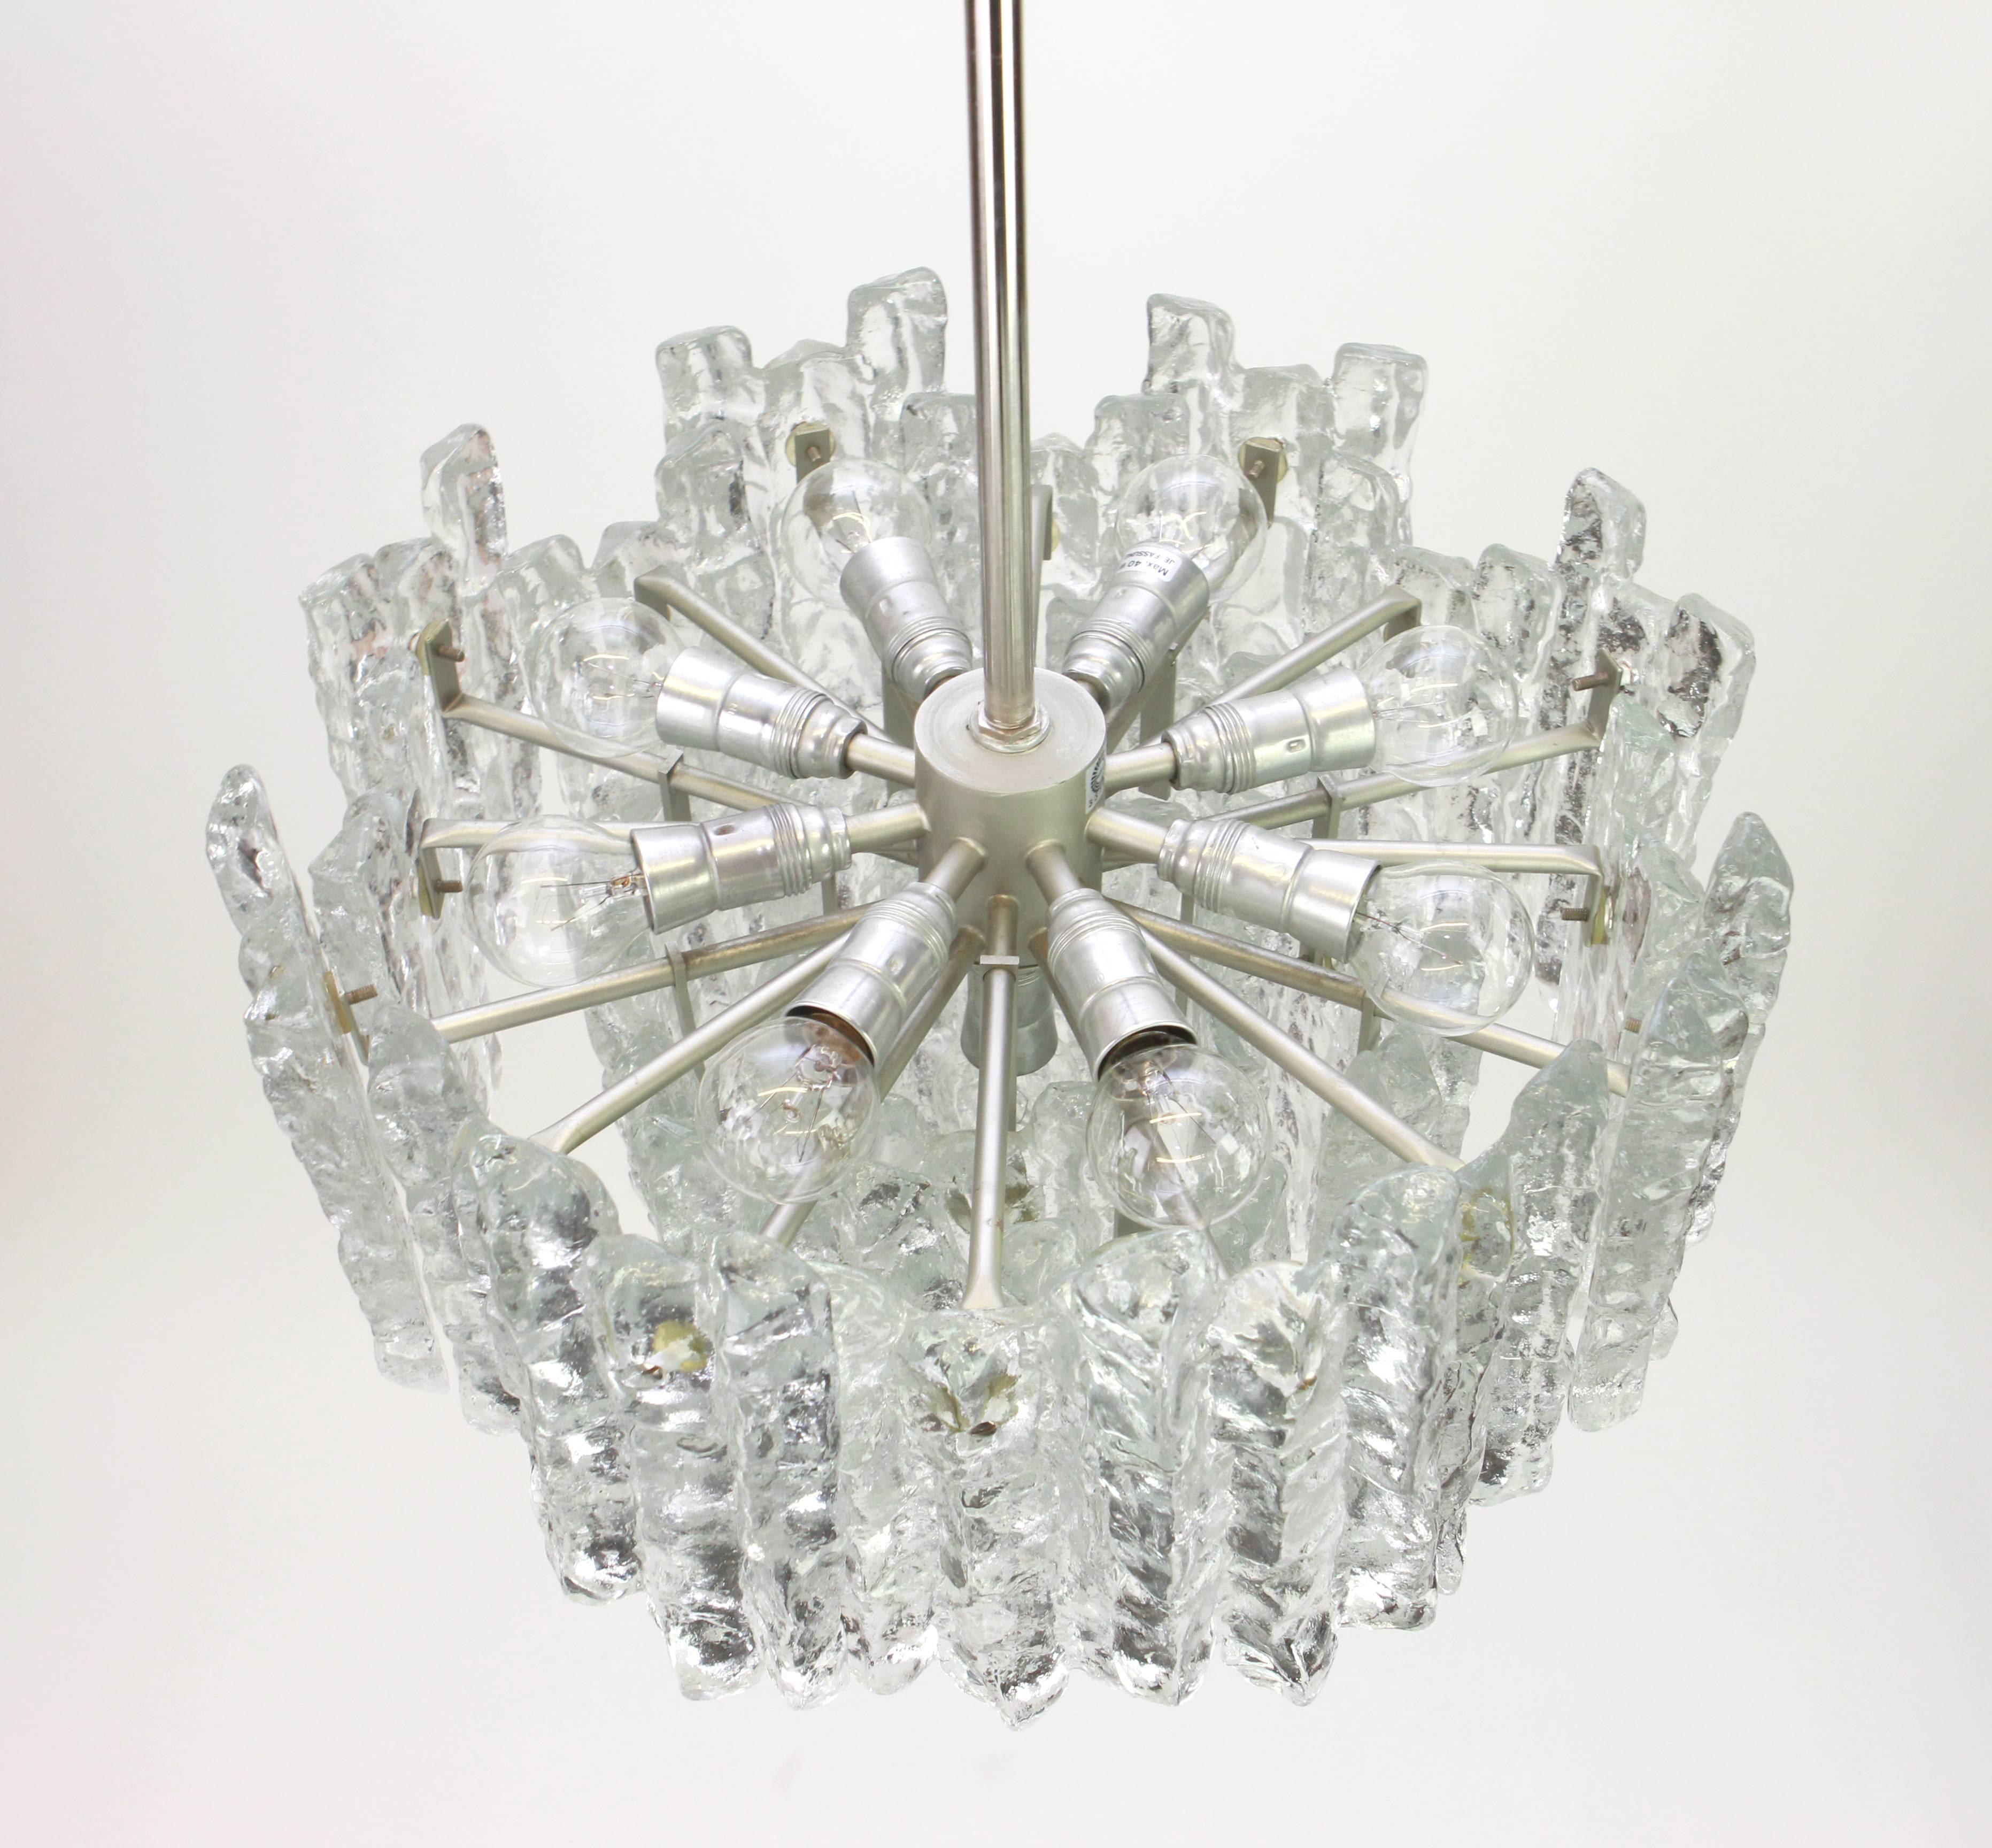 1 of 4 Large Murano Ice Glass Chandelier by Kalmar, Austria, 1960s For Sale 1